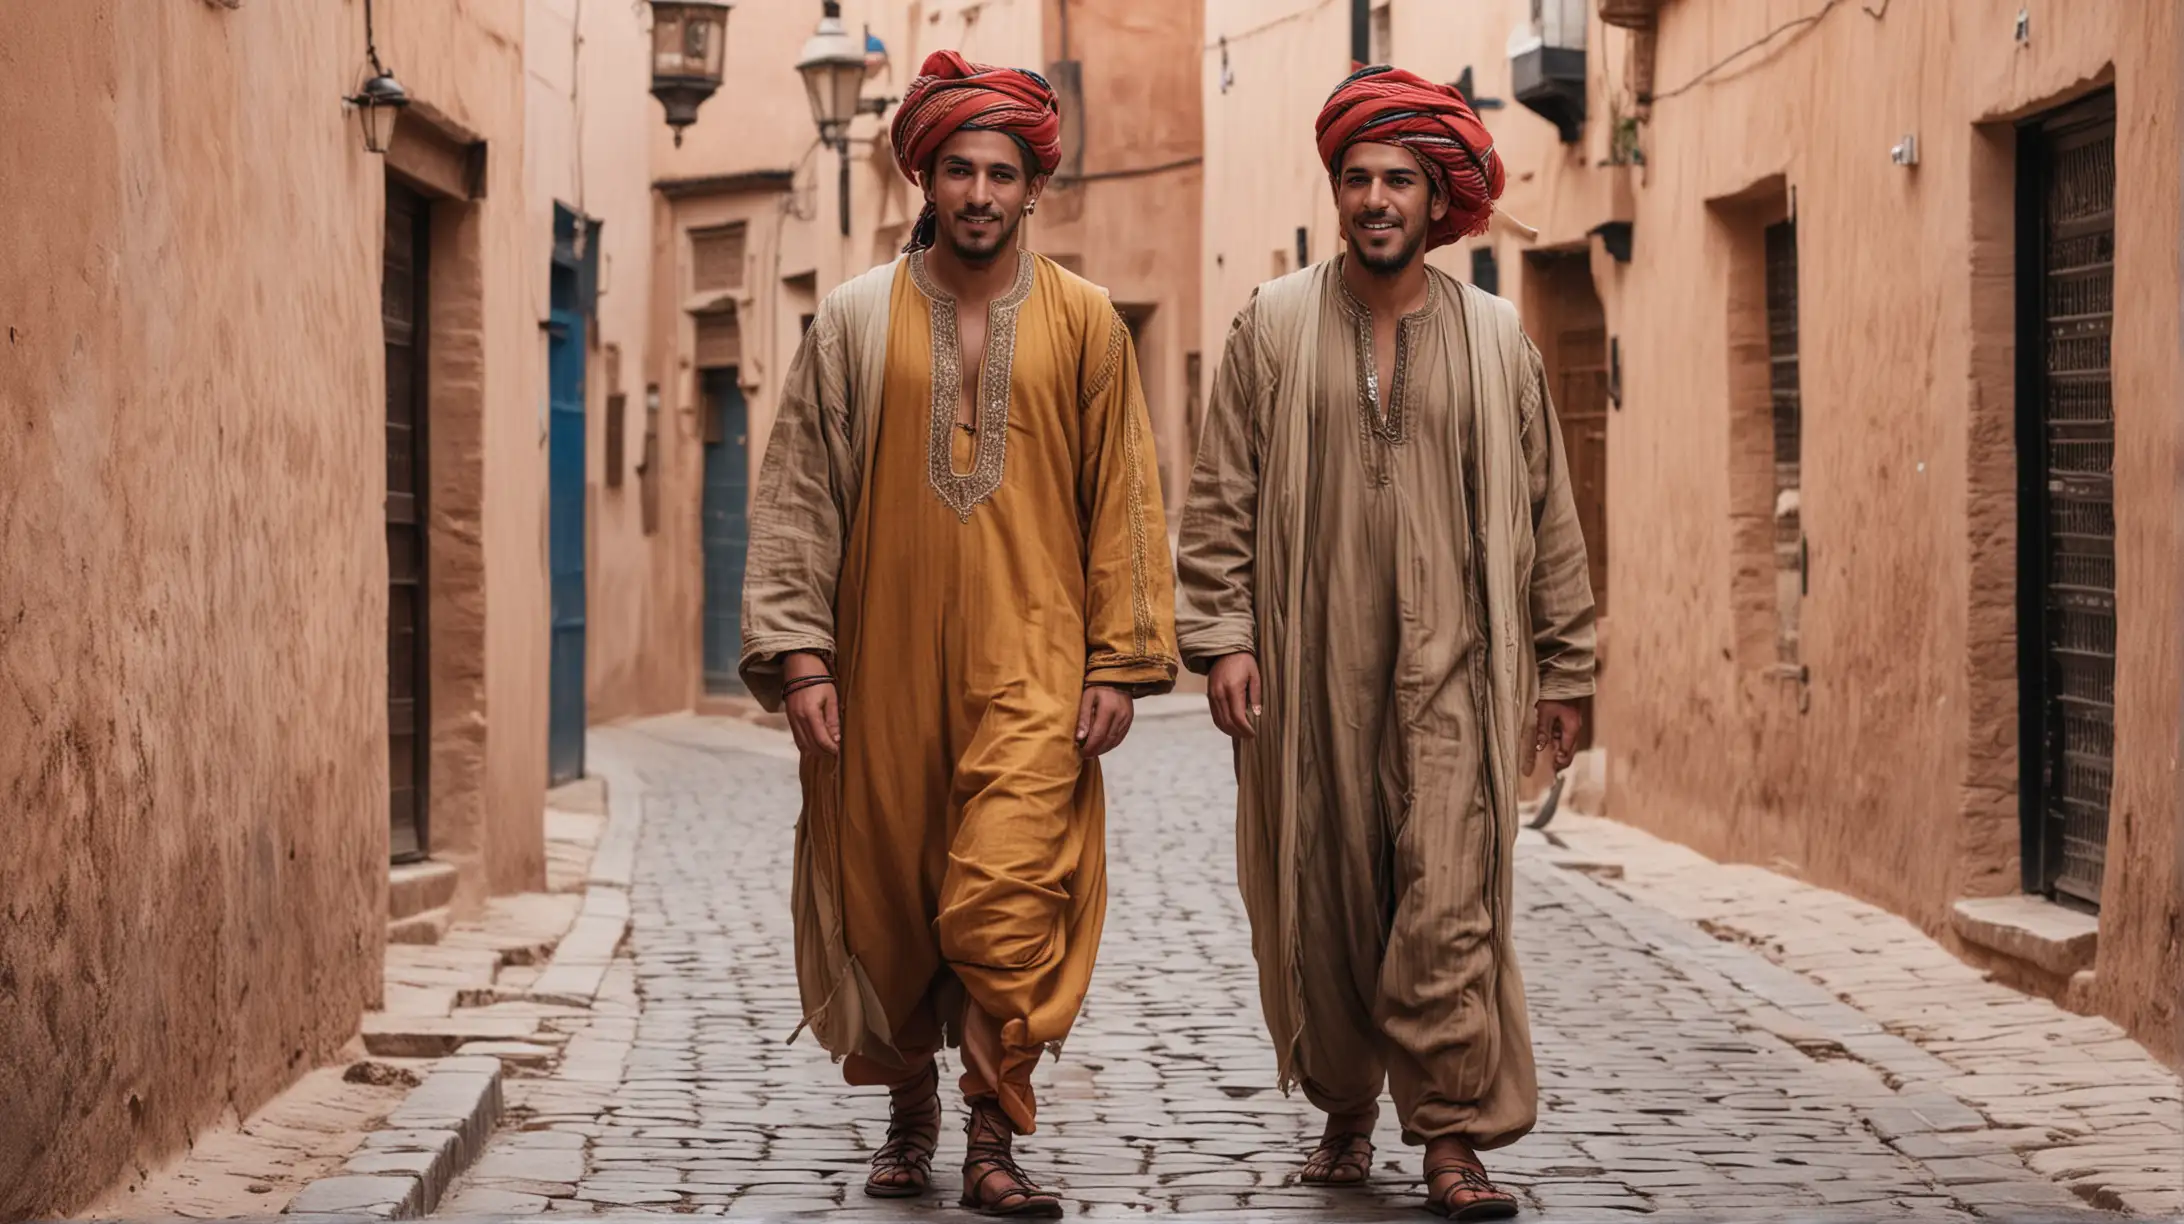 Two Moroccan men in traditional street clothes, profile, full figures, head to toe, no smiling